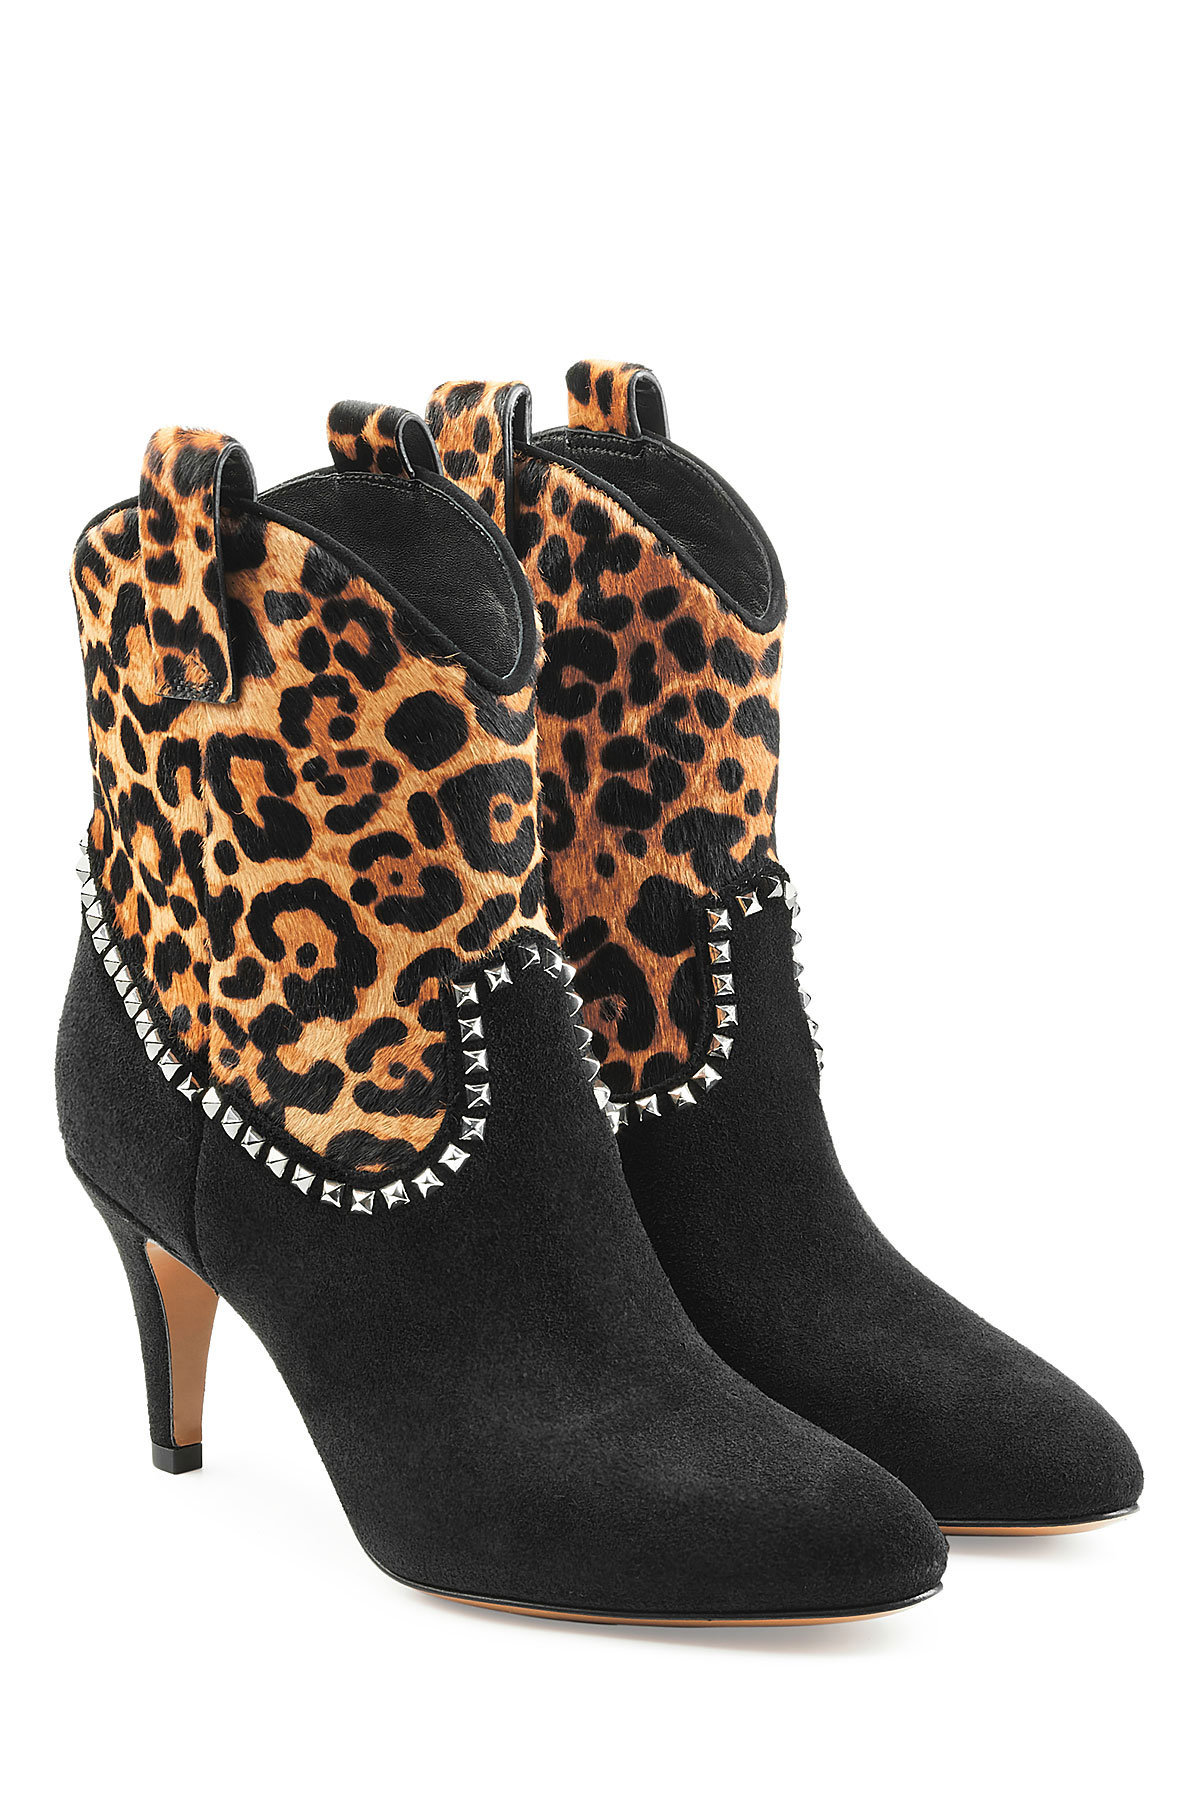 Marc Jacobs - Embellished Suede Ankle Boots with Printed Pony Hair